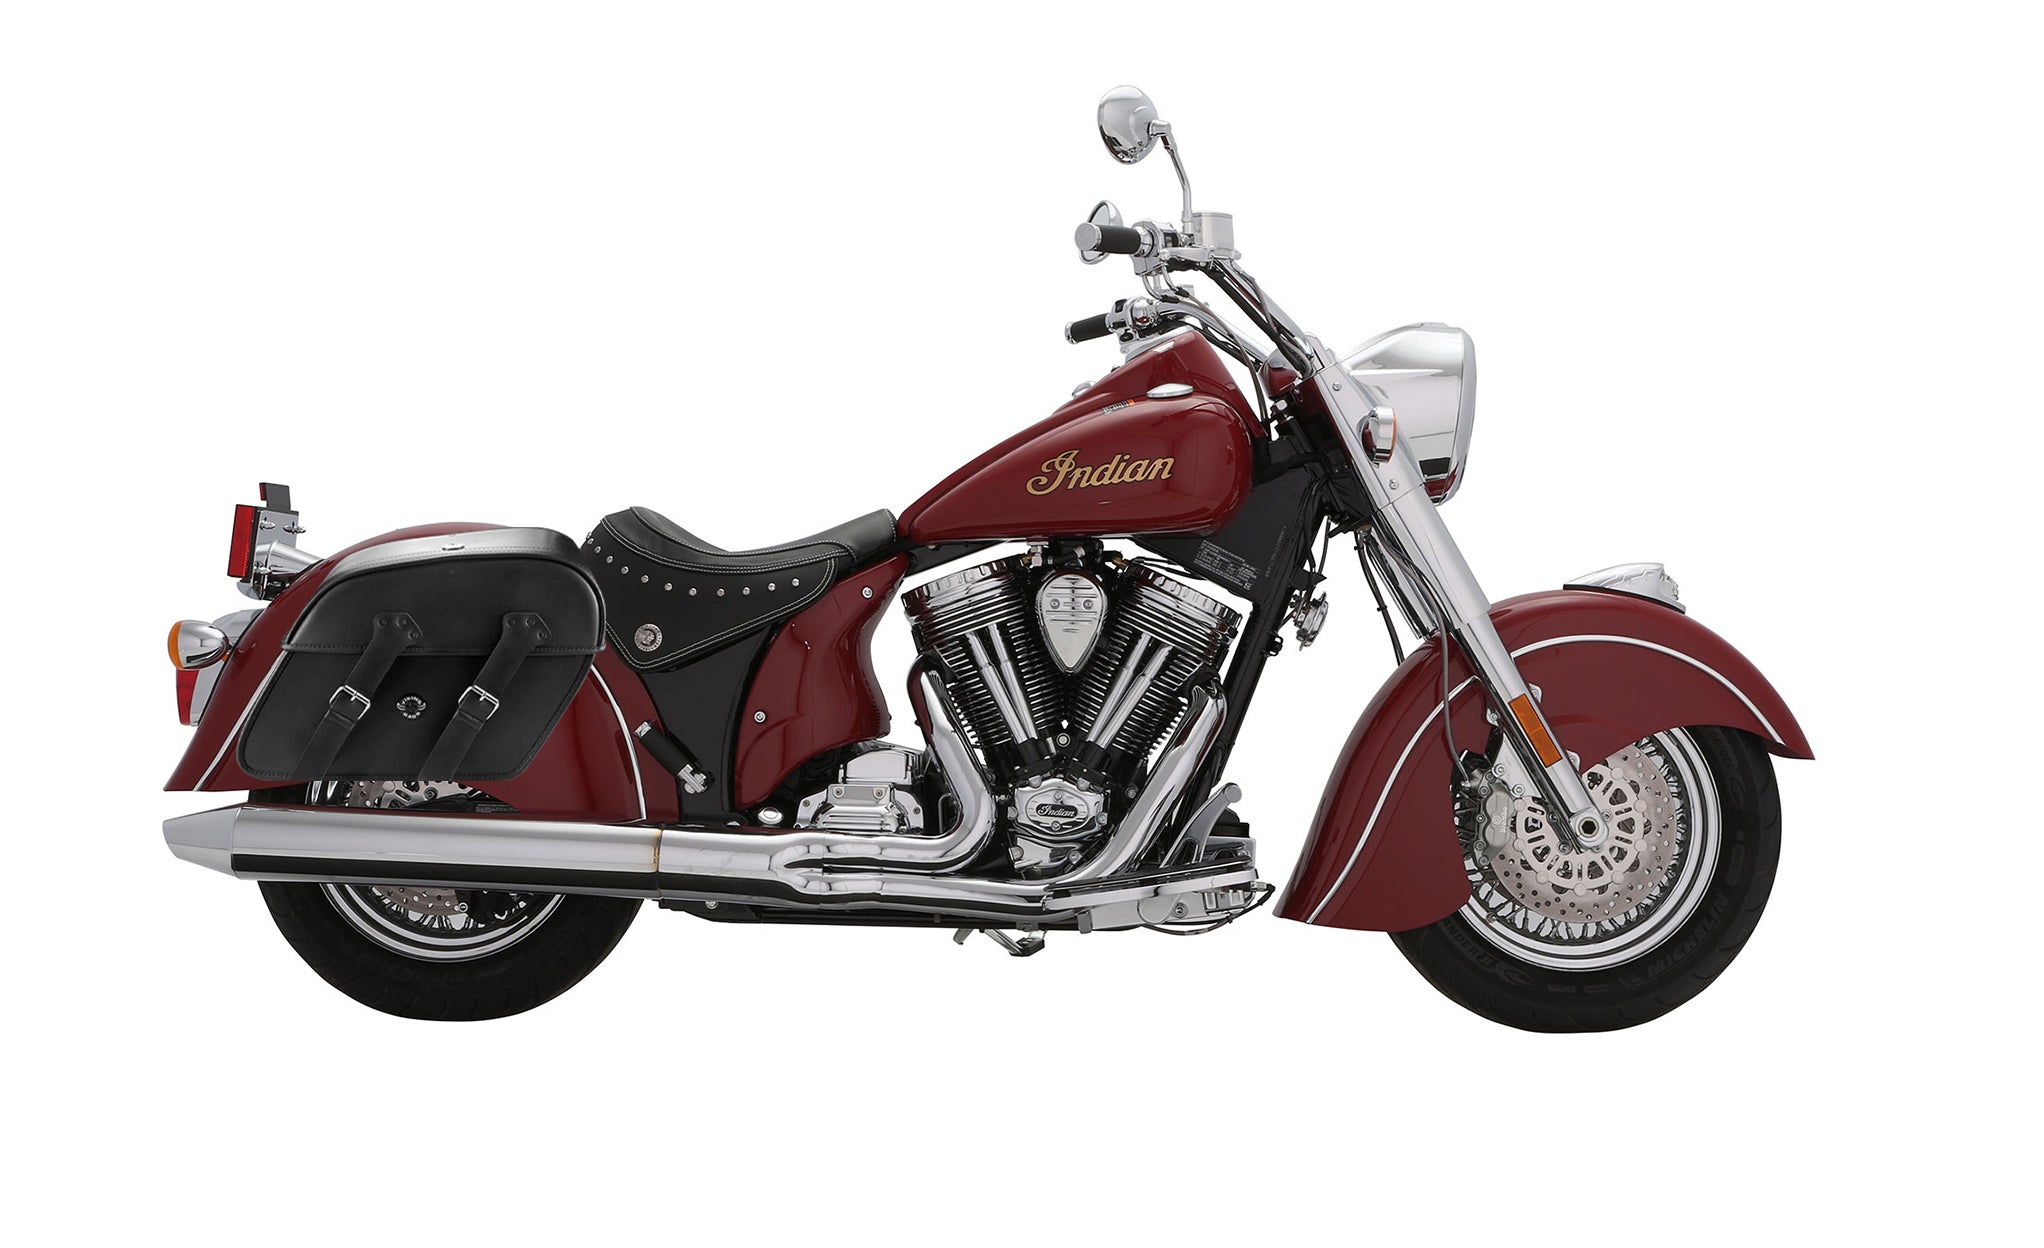 Viking Raven Large Indian Chief Deluxe Motorcycle Leather Saddlebags on Bike Photo @expand